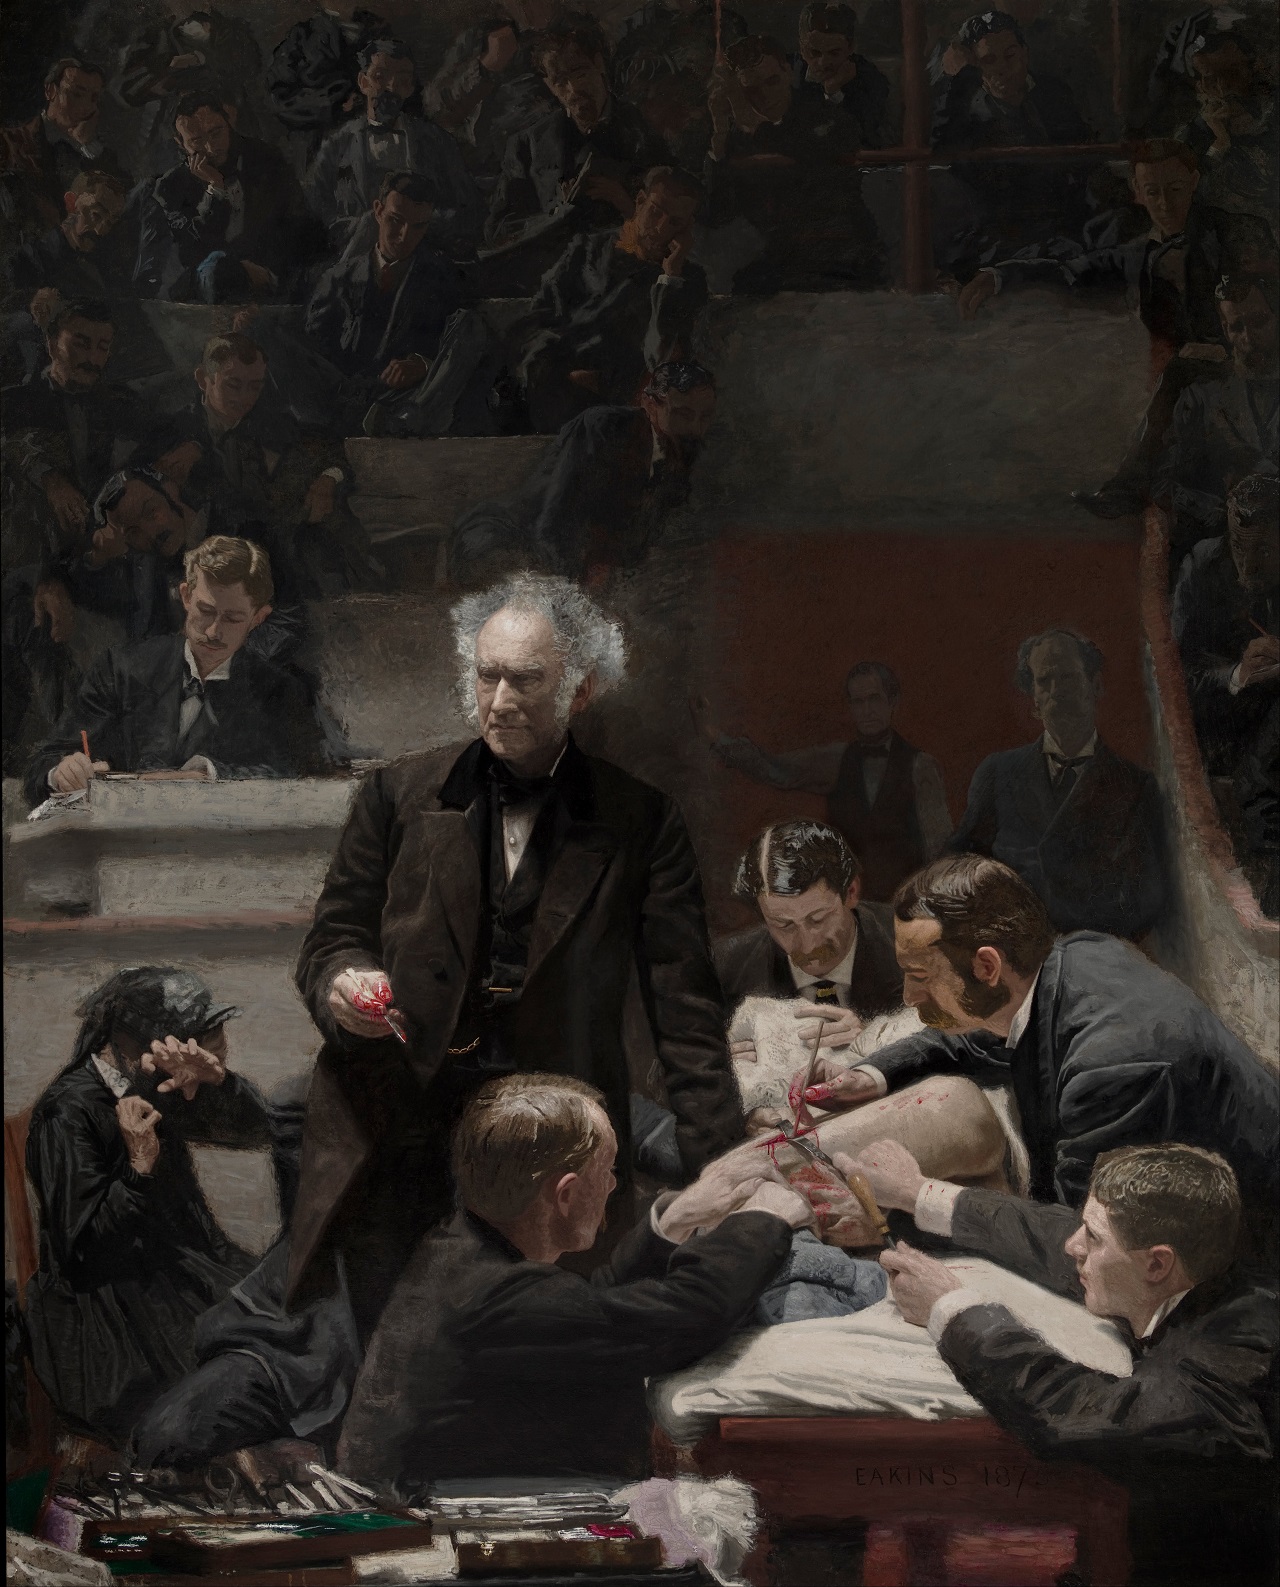 Thomas Eakins - The Gross Clinic 1875